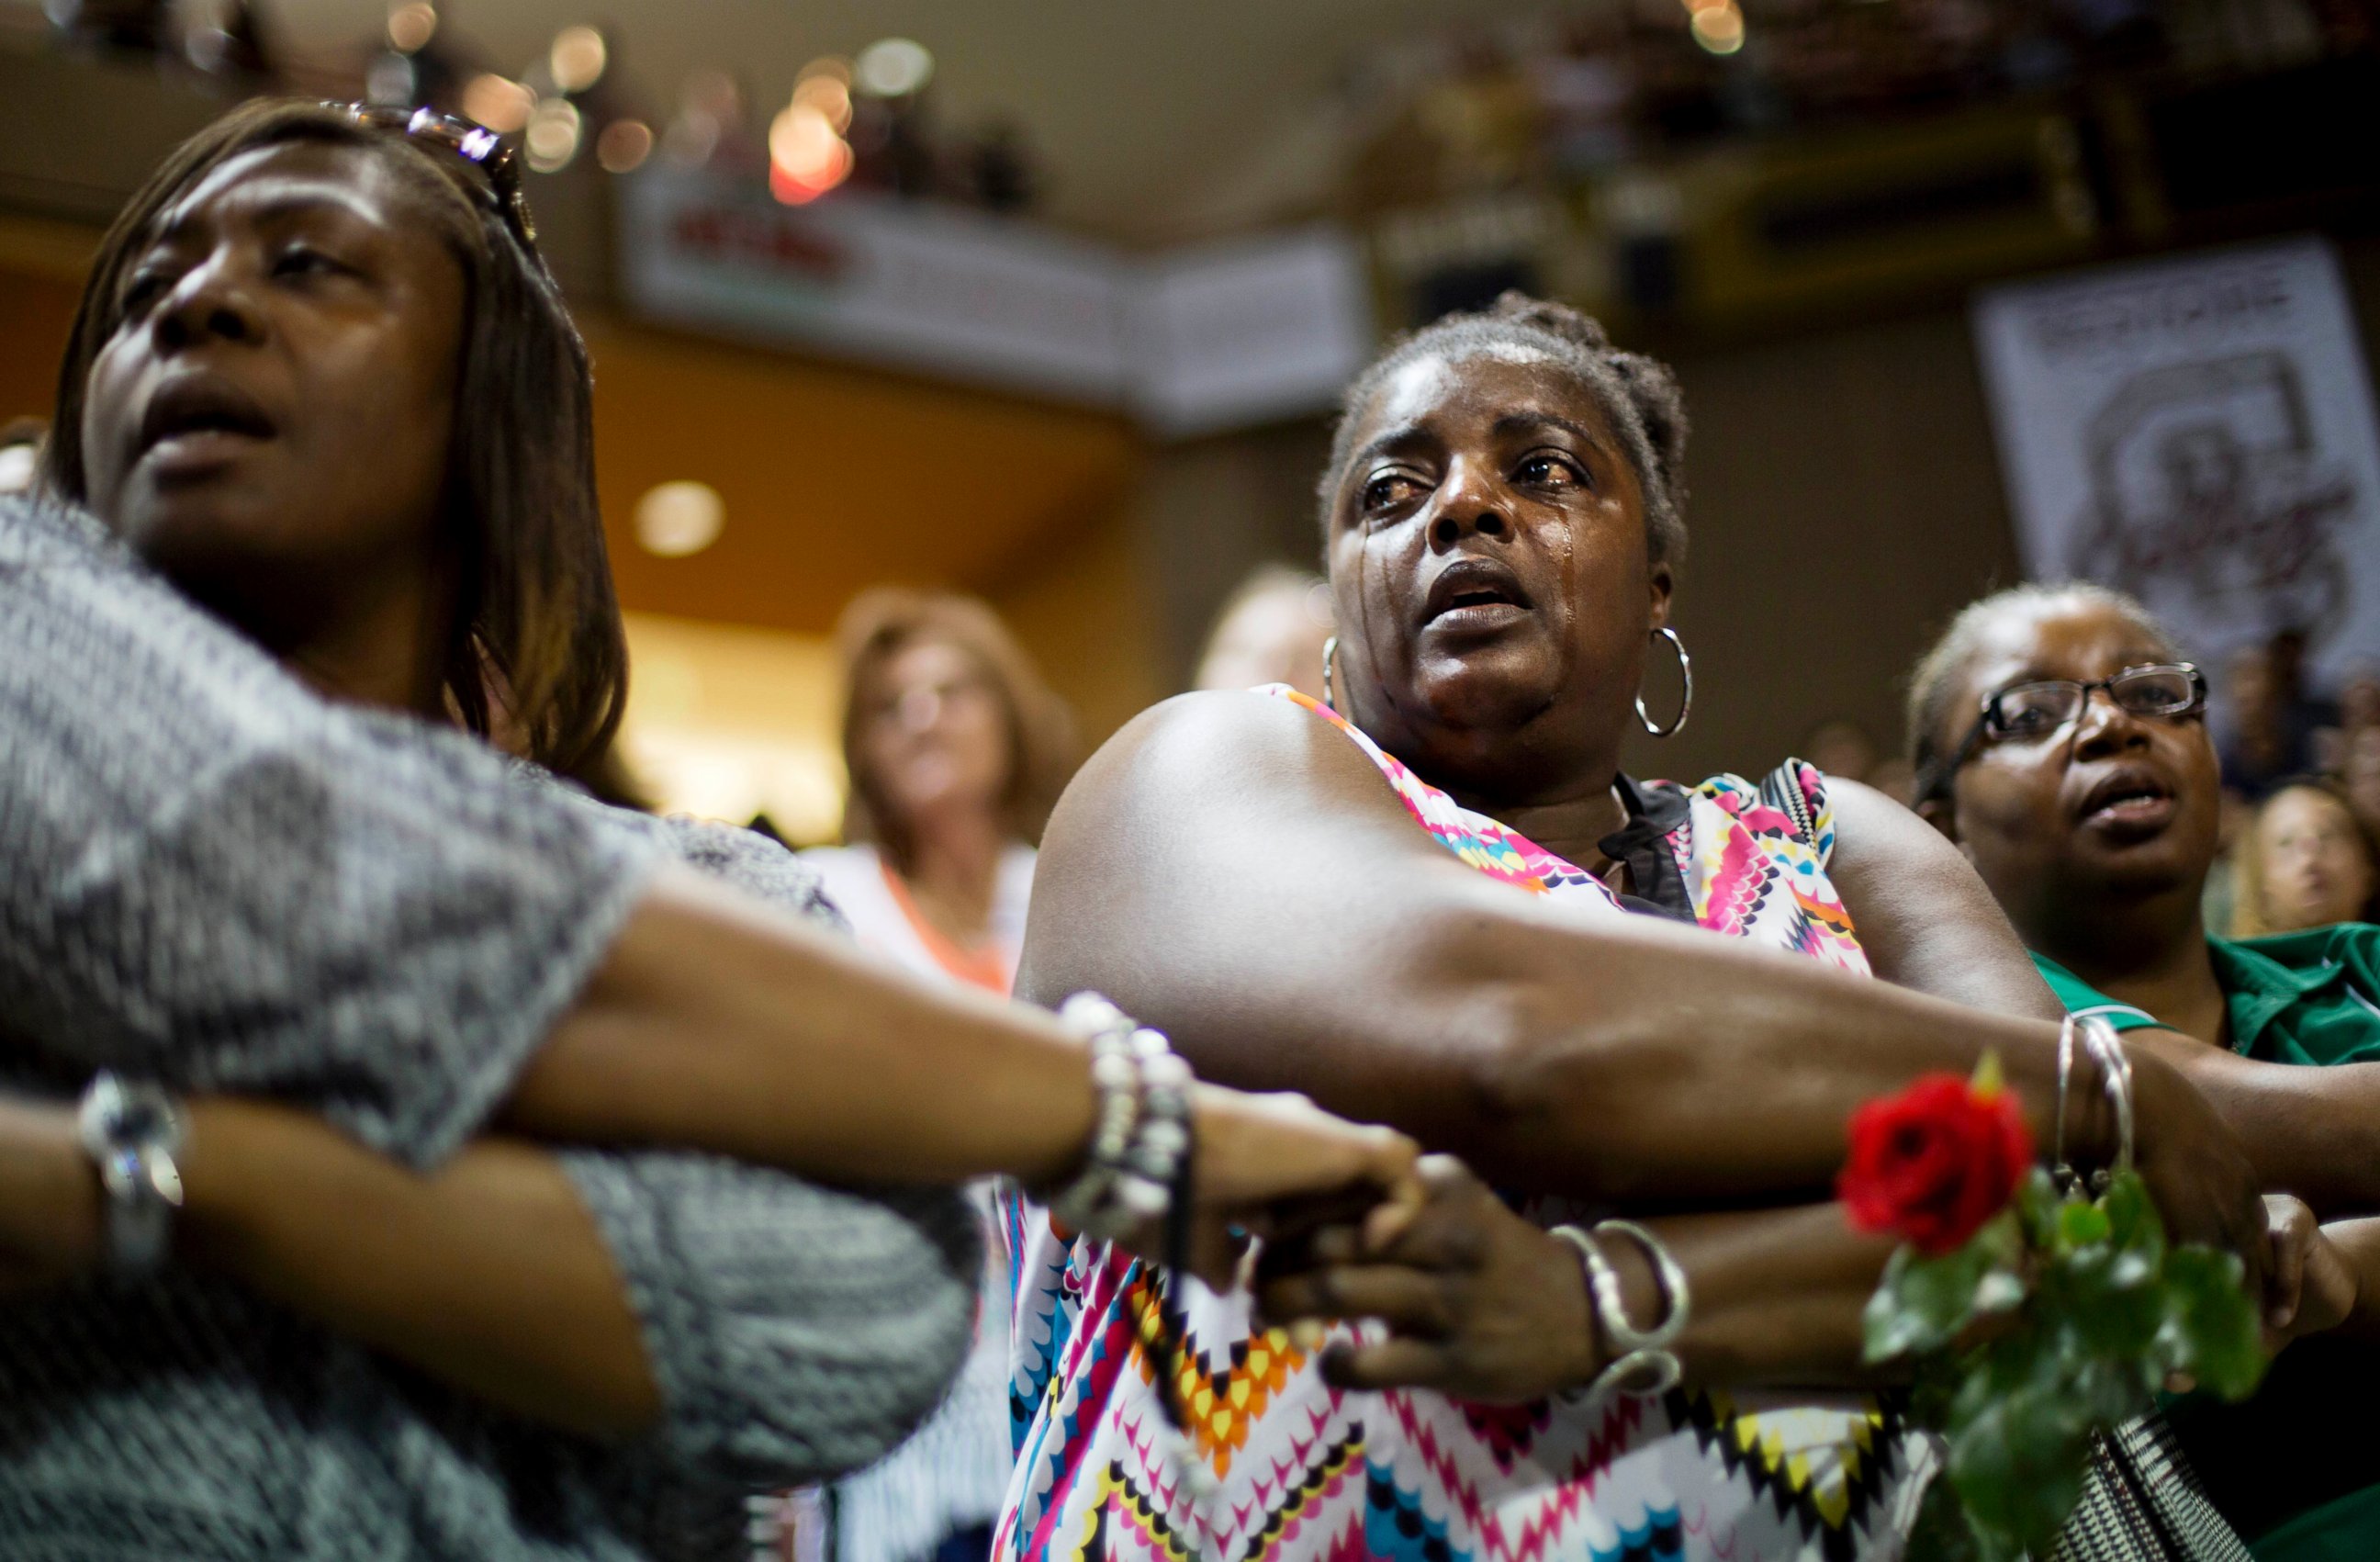 PHOTO: Barbara Lloyd, of Charleston, S.C., cries as she joins hands with mourners during the singing of "We Shall Overcome" at a memorial service for the victims of the shooting at Emanuel AME Church, Friday, June 19, 2015, in Charleston, S.C. 